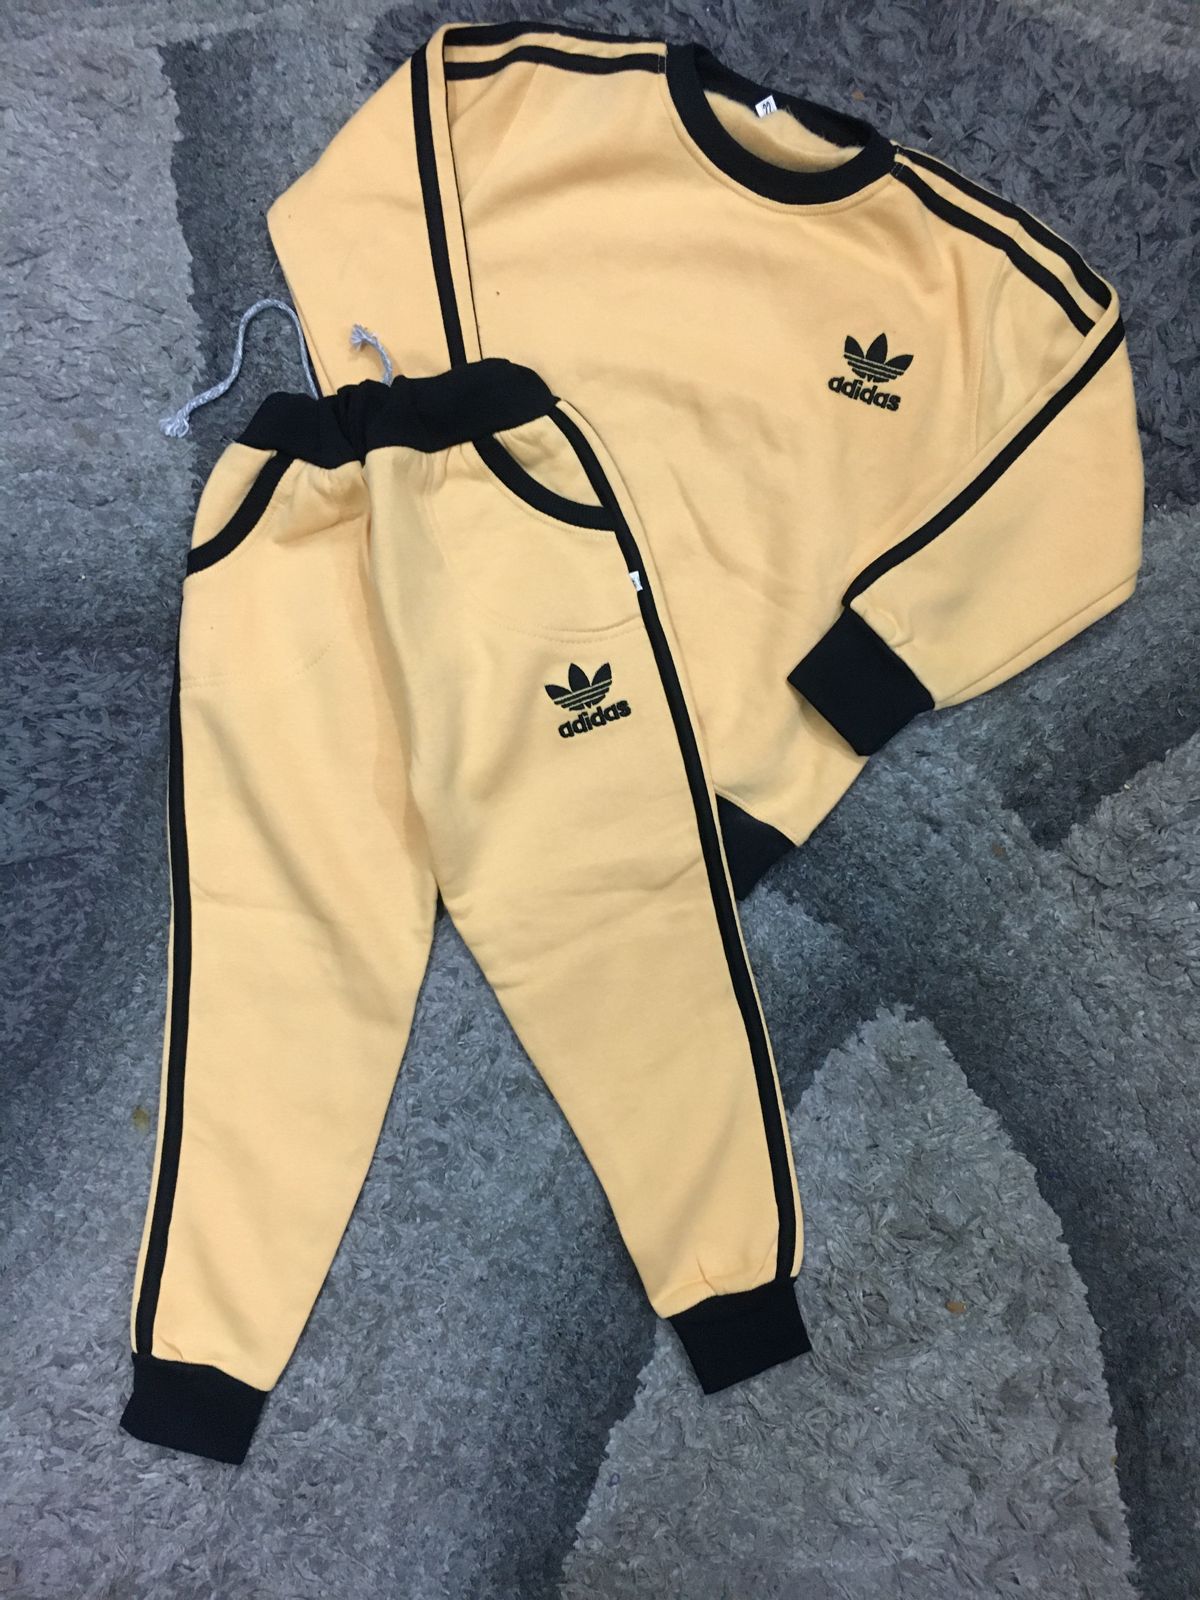 Kids Winter Gala Sale Addidas Super Quality Track Suit Shirt with Trouser Yellow